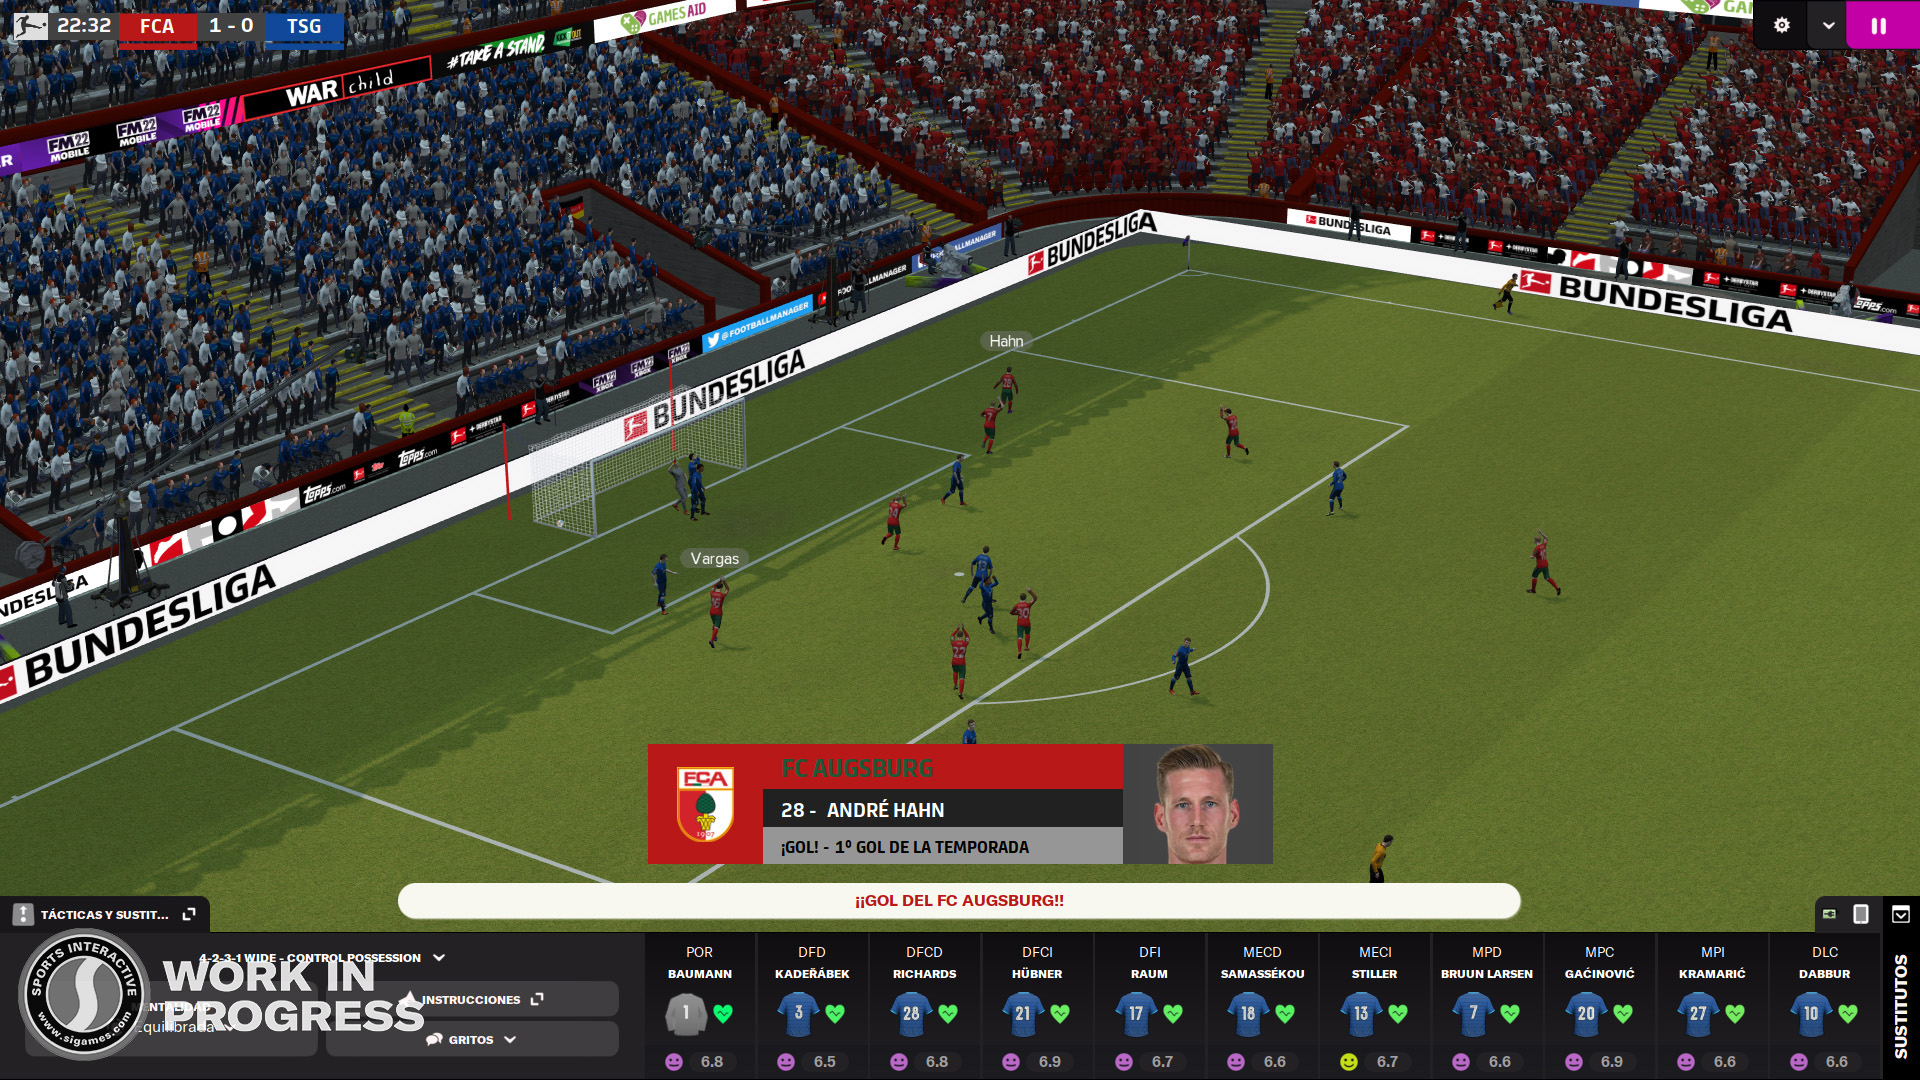 football manager 2016 pc torrent